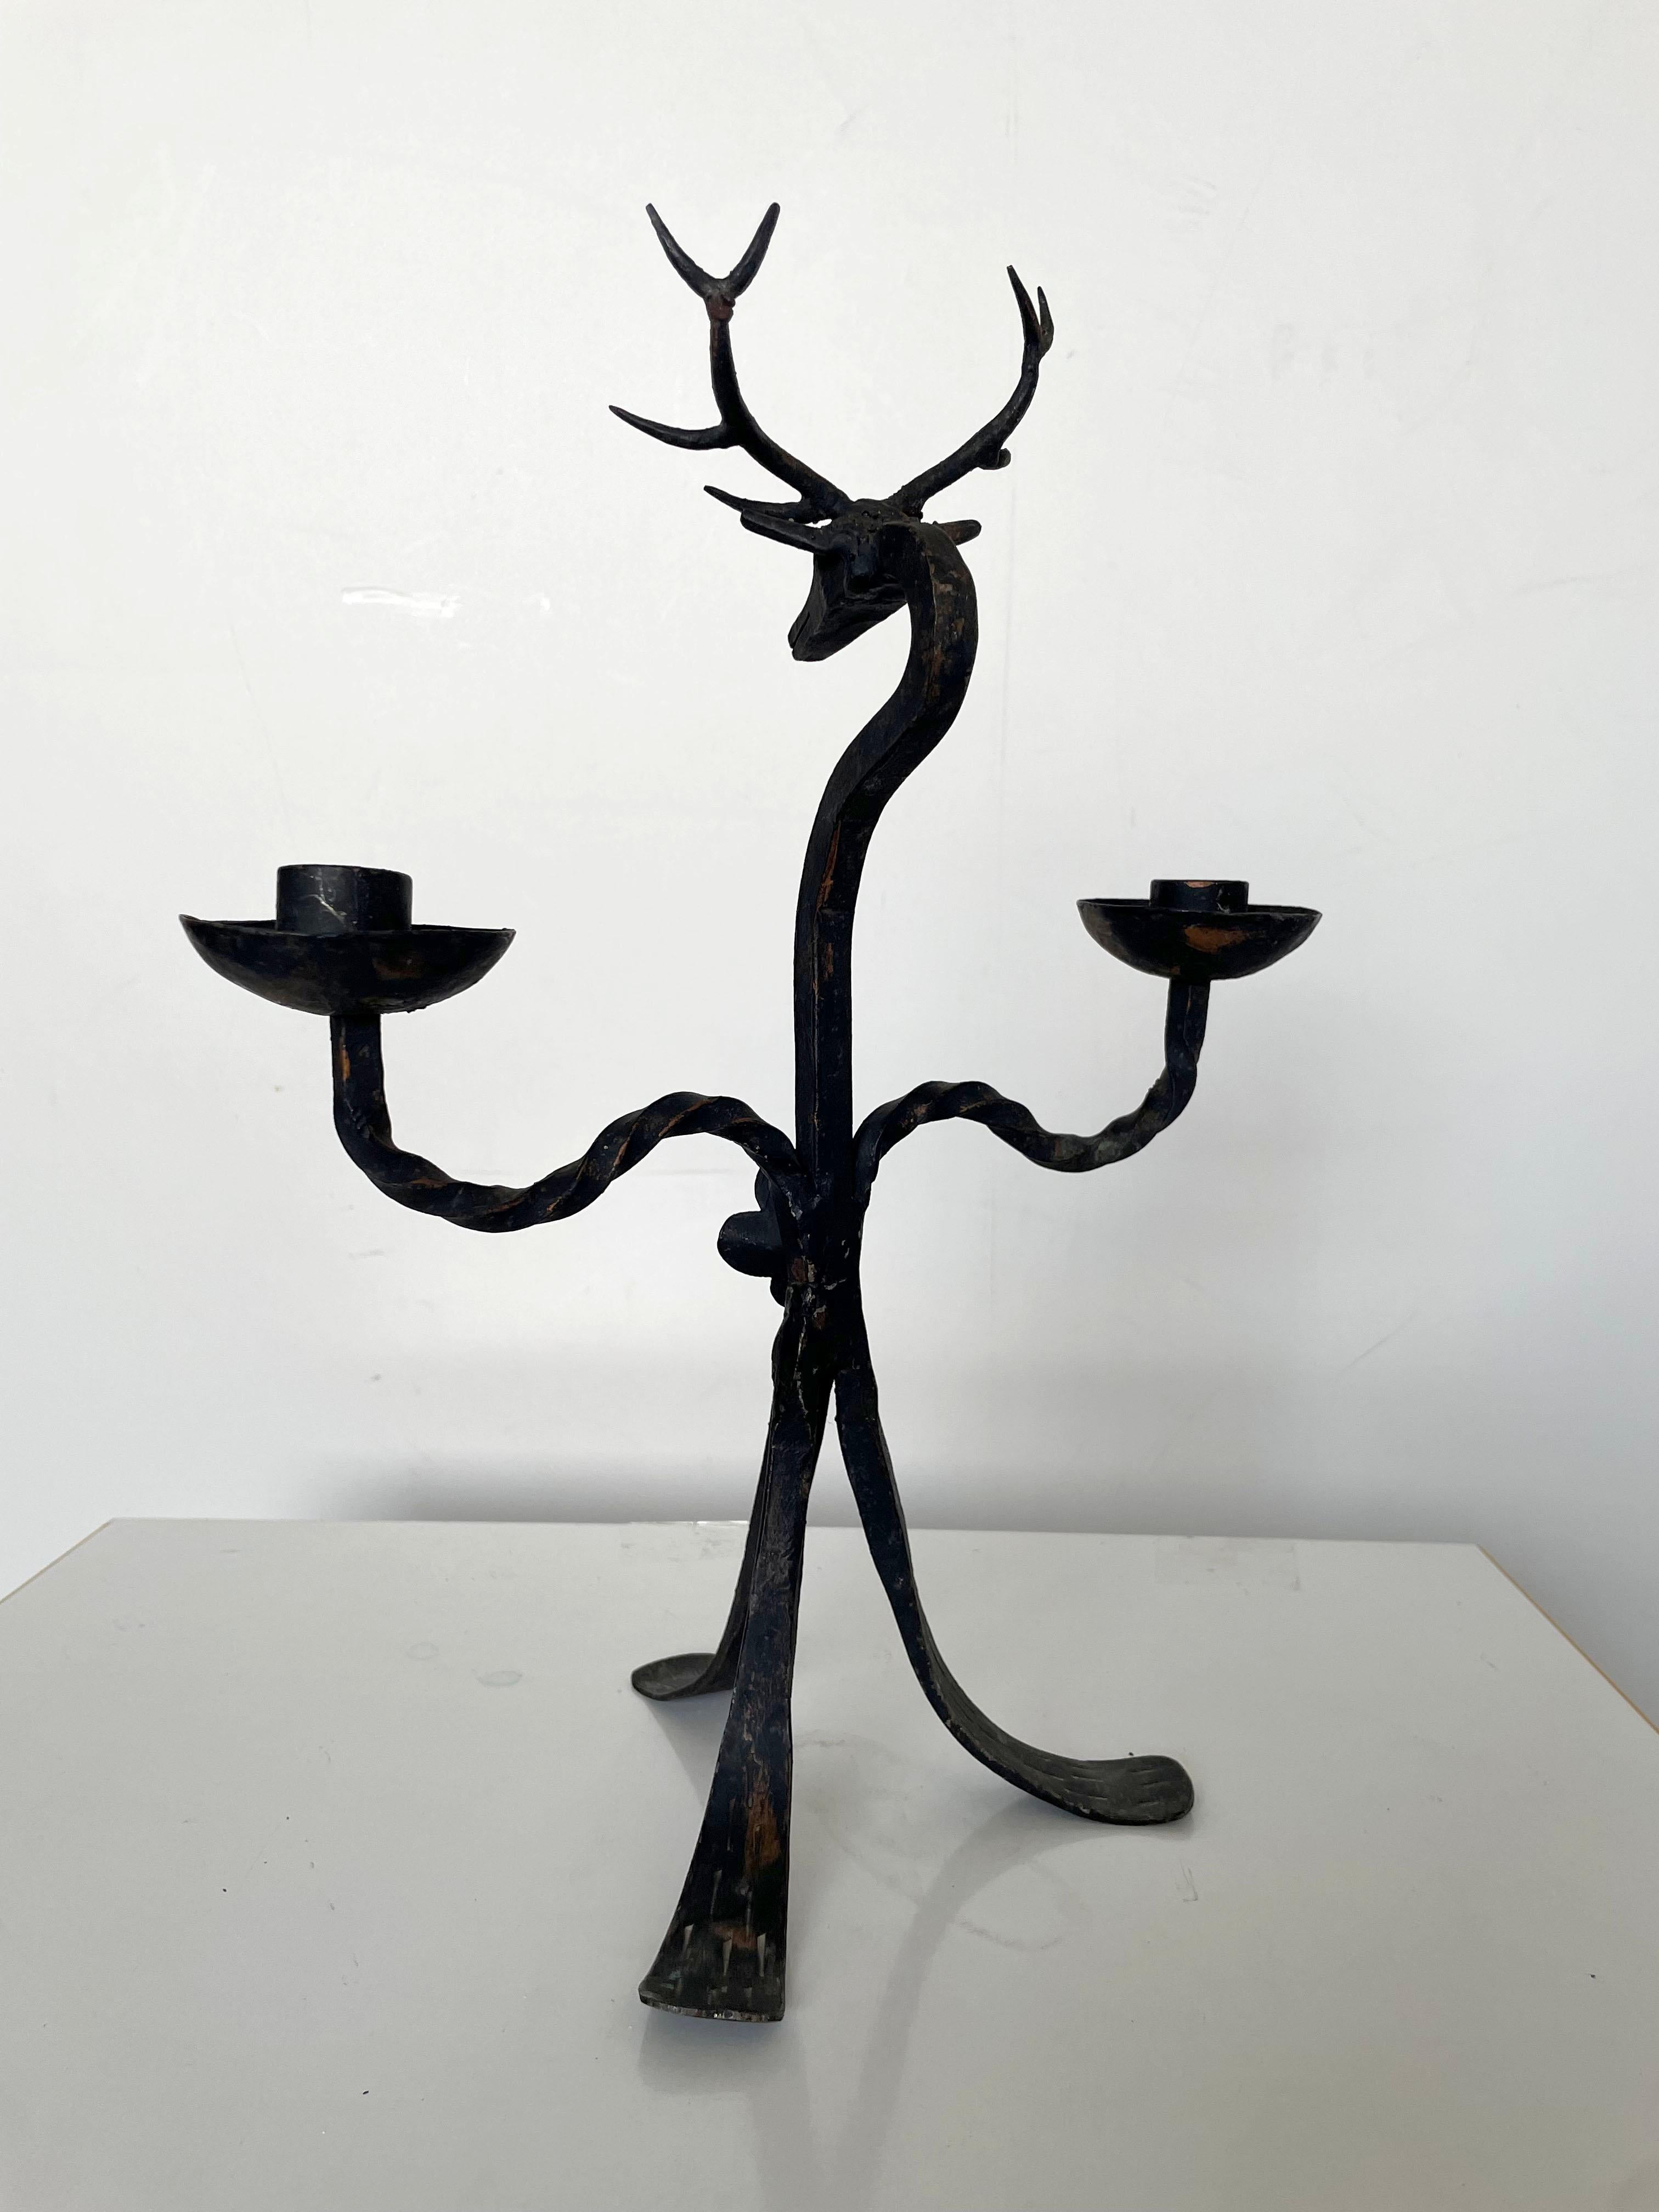 European Brutalist Style Wrought Iron Deer Shaped Candlestick Candelabra, 1940s / 1950s For Sale